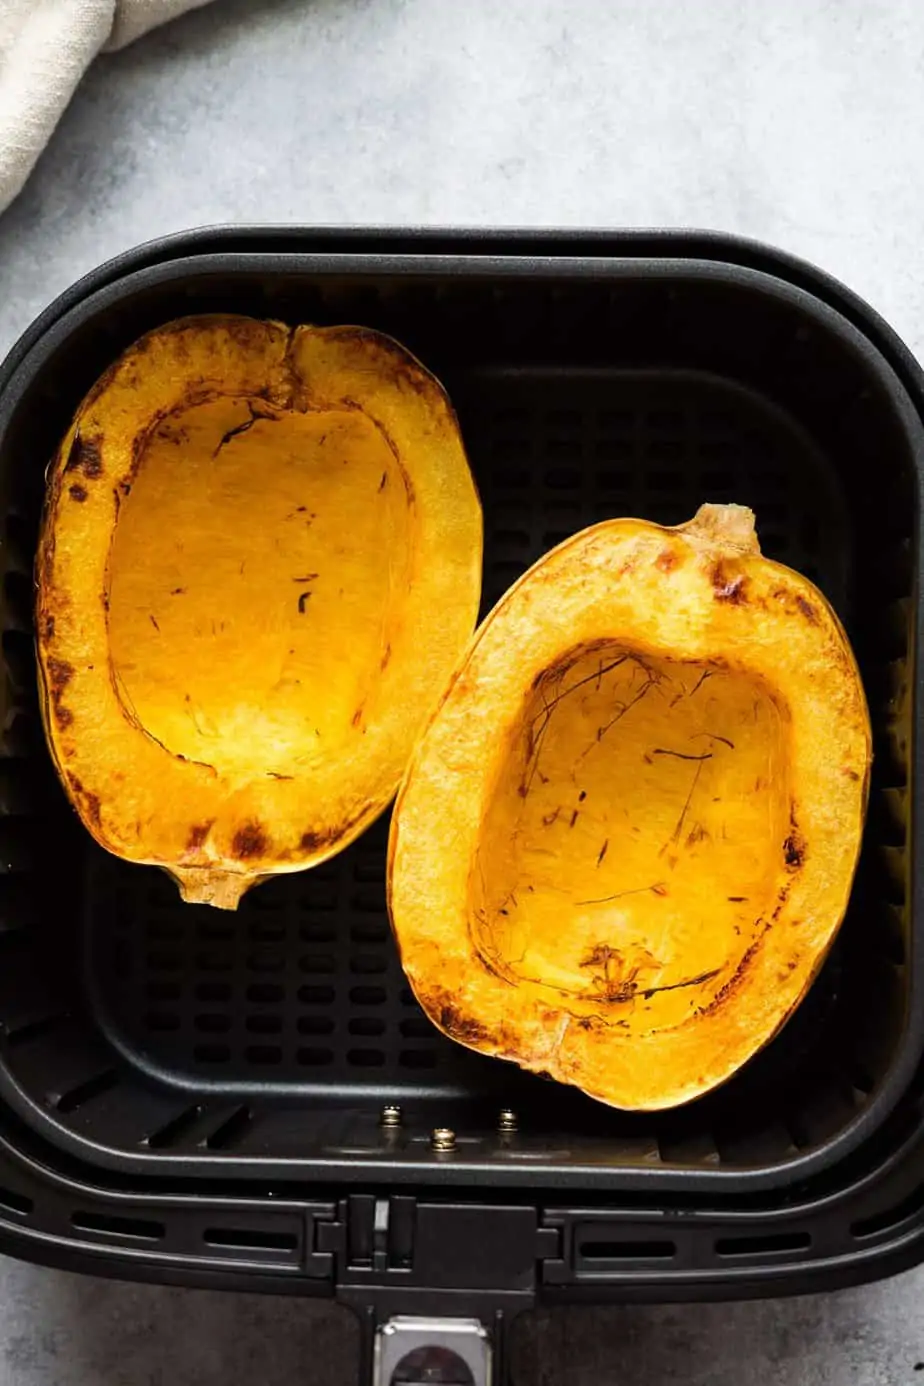 after the squashes are cooked in the air fryer basket